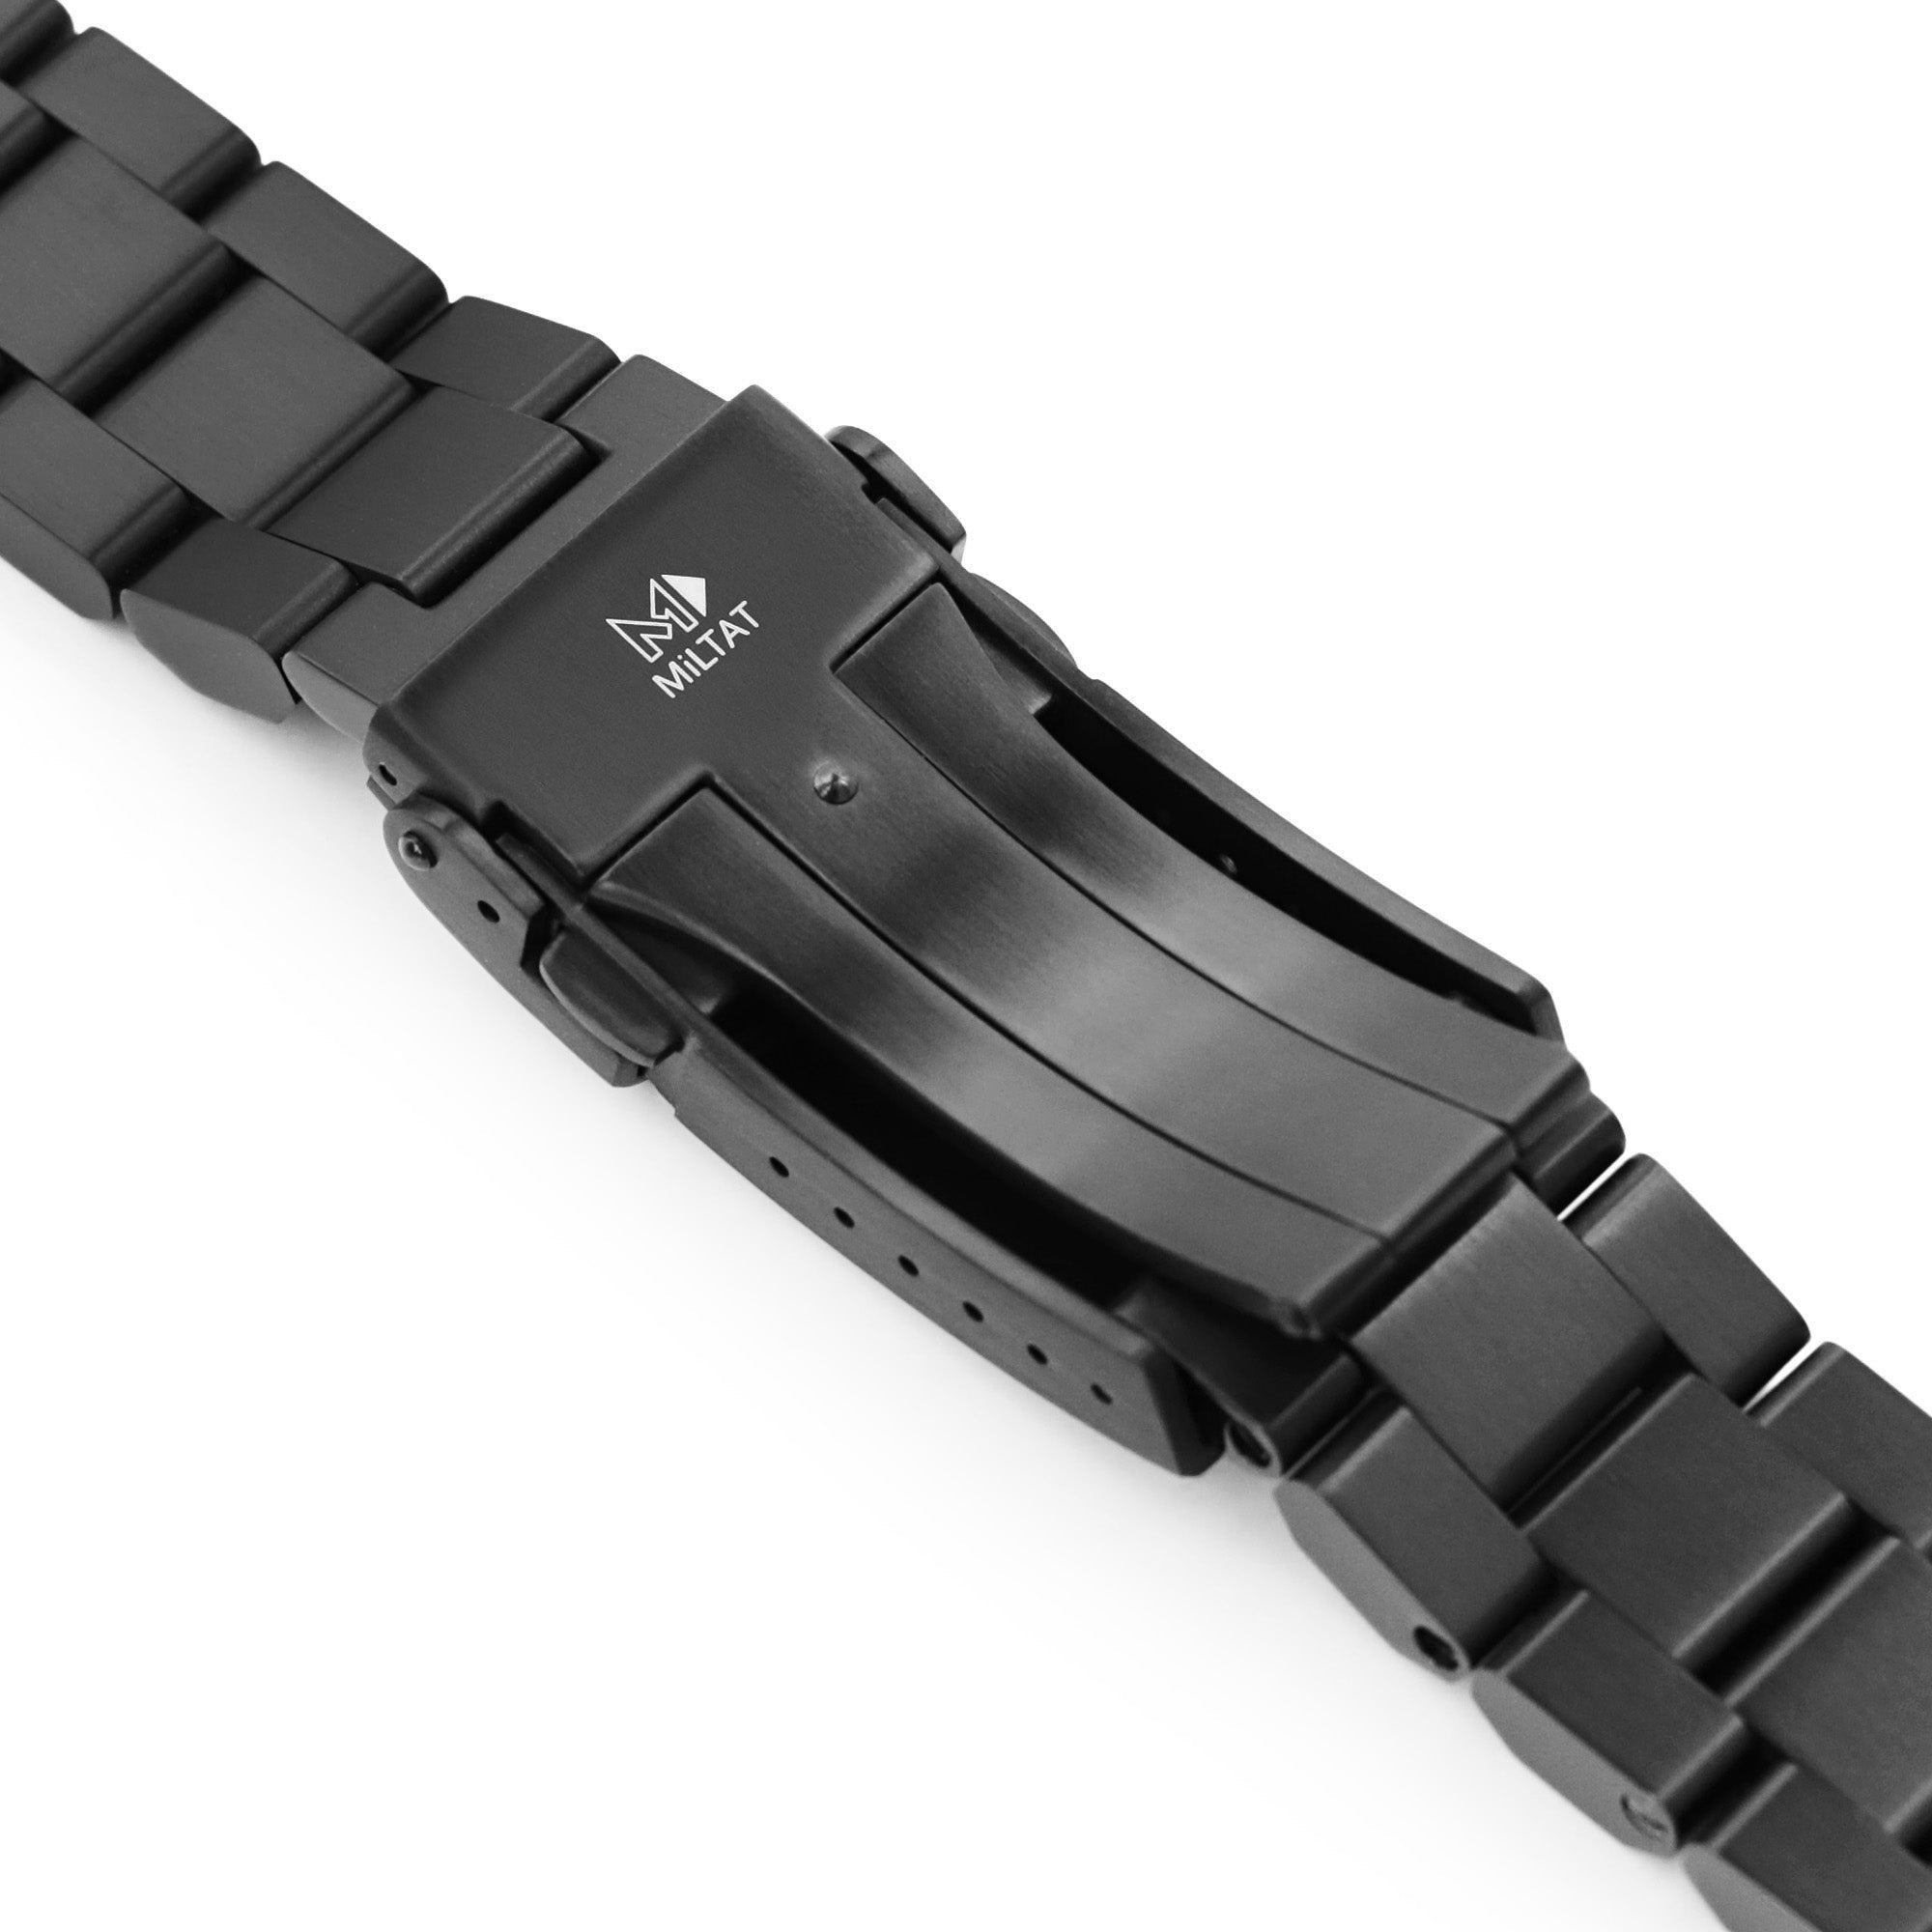 22mm Hexad Watch Band compatible with Seiko Samurai SRPB55, 316L Stainless Steel Diamond-like Carbon (DLC coating) V-Clasp